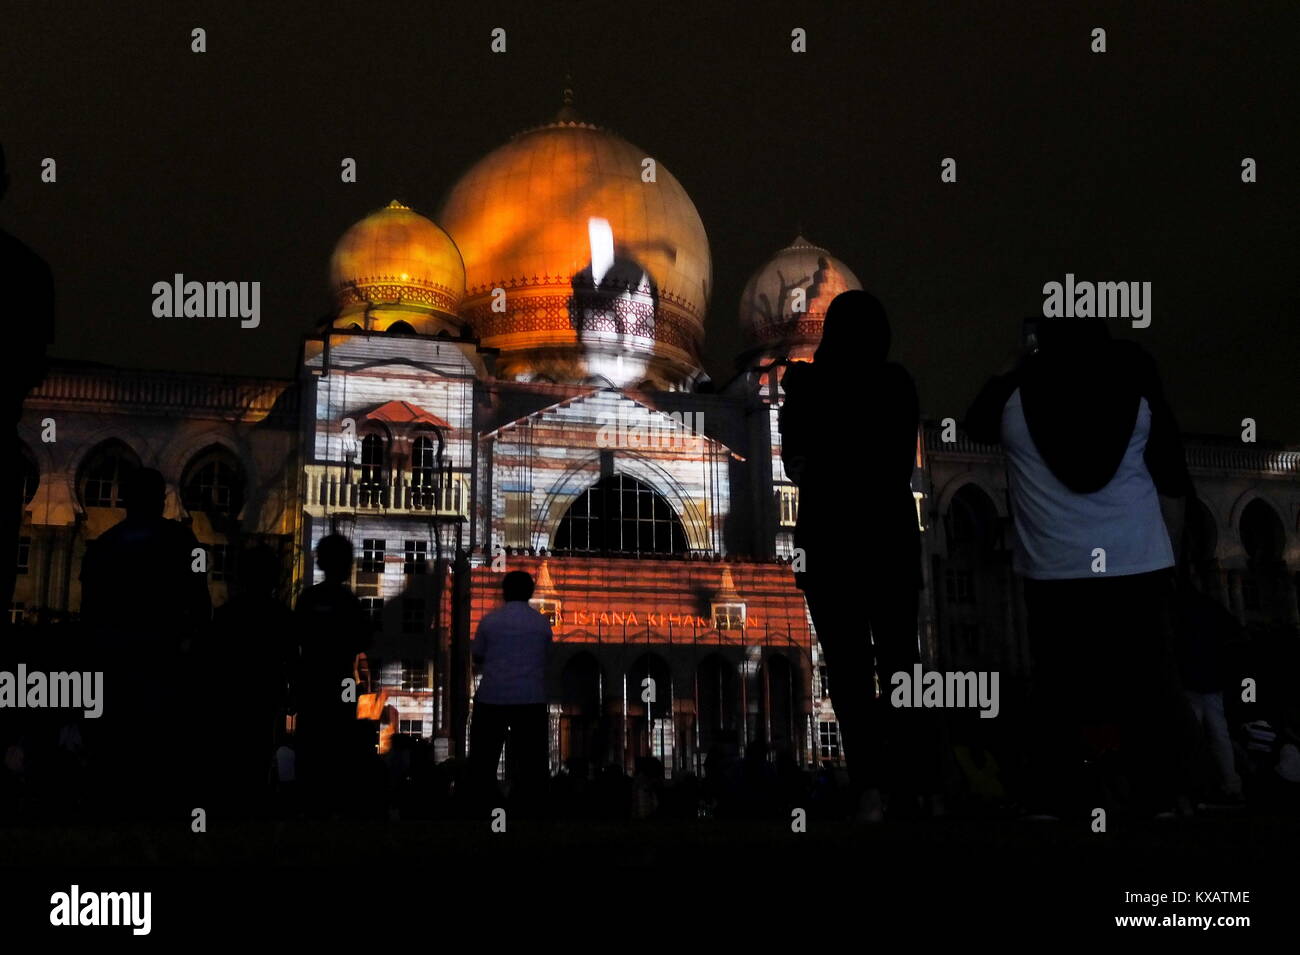 KUALA LUMPUR, MALAYSIA - DECEMBER 28: People watch a Palace of Justice building is cover by Projection Mapping during the Putrajaya Lighting Festival on December 28, 2017 in Putrajaya, Malaysia. The four-night festival featured a light art communities and university students in Malaysia showcasing their creativity of light-themed events, including Luminous lighting effect show, decorative arch and light structure exhibits, car light show, night fun ride, wayang kulit performance (shadow puppetry), and a light garden . Credit: Samsul Said/AFLO/Alamy Live News Stock Photo